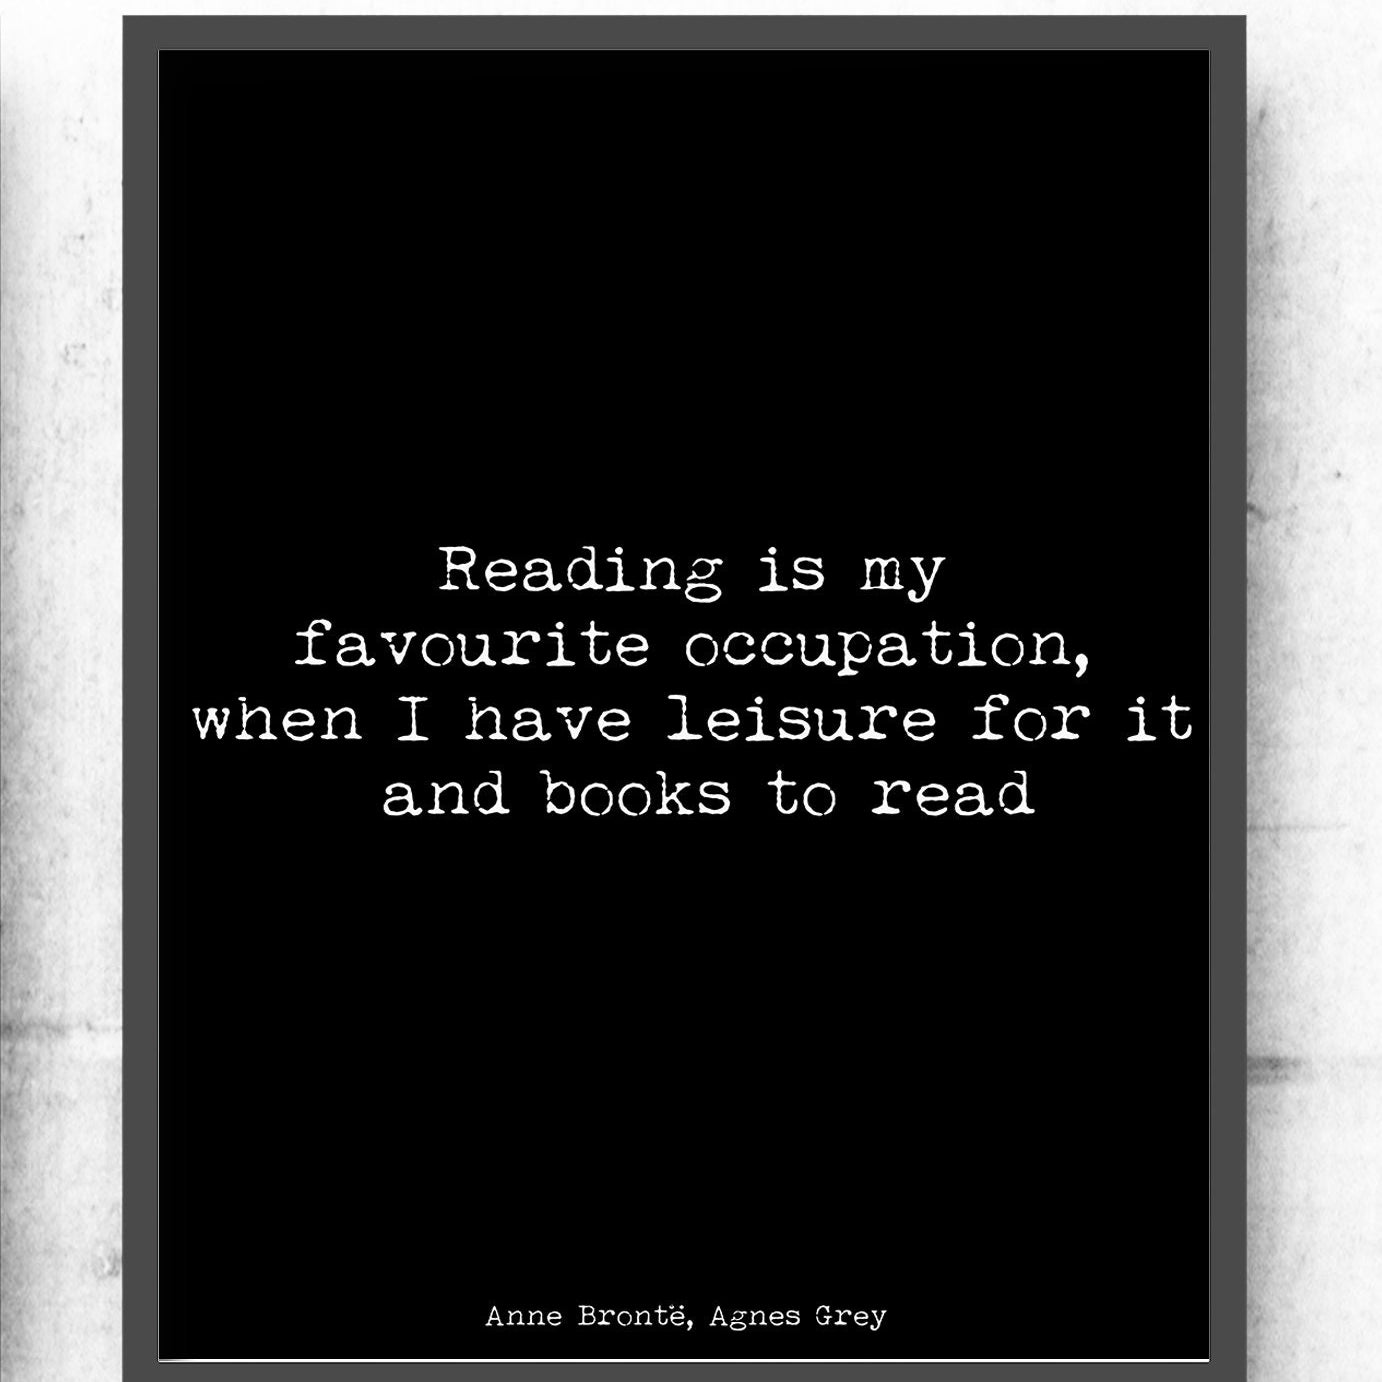 Agnes Grey Anne Bronte Art Print, Reading Quote for Bookworms in Black & White